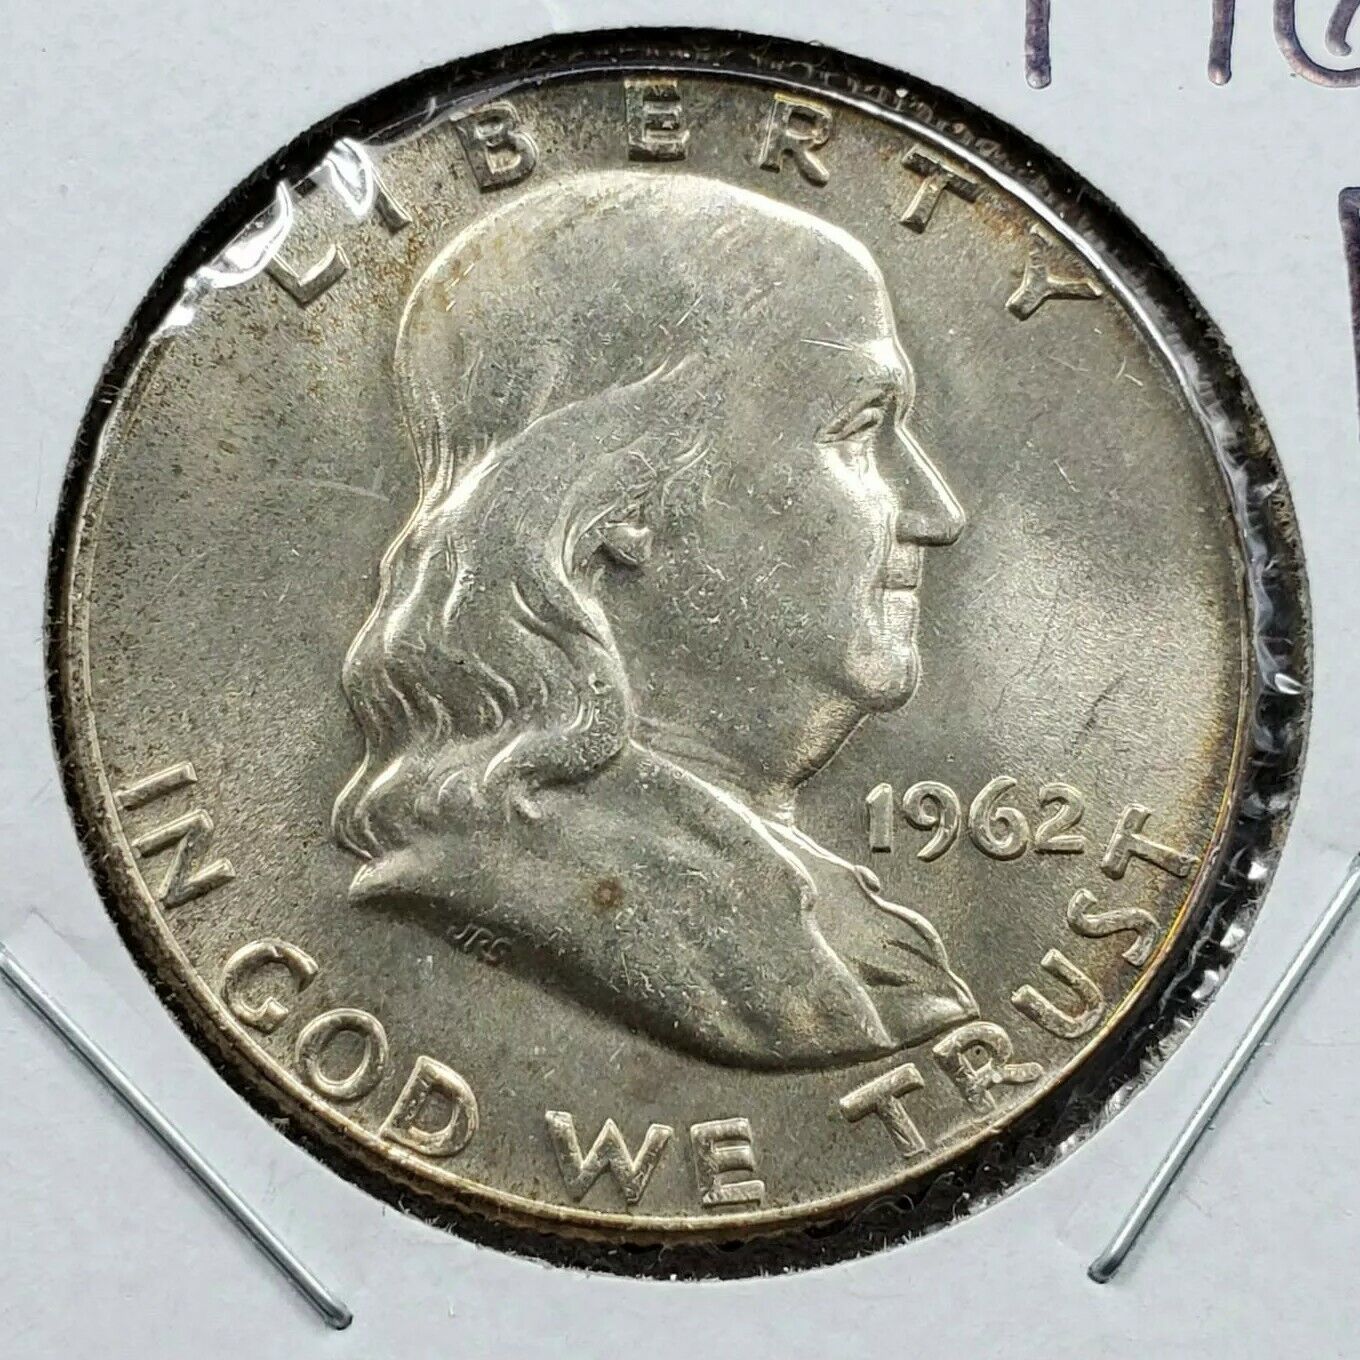 1962 P Franklin Silver Half Dollar Coin Choice BU UNCIRCULATED SOME Neat Toning